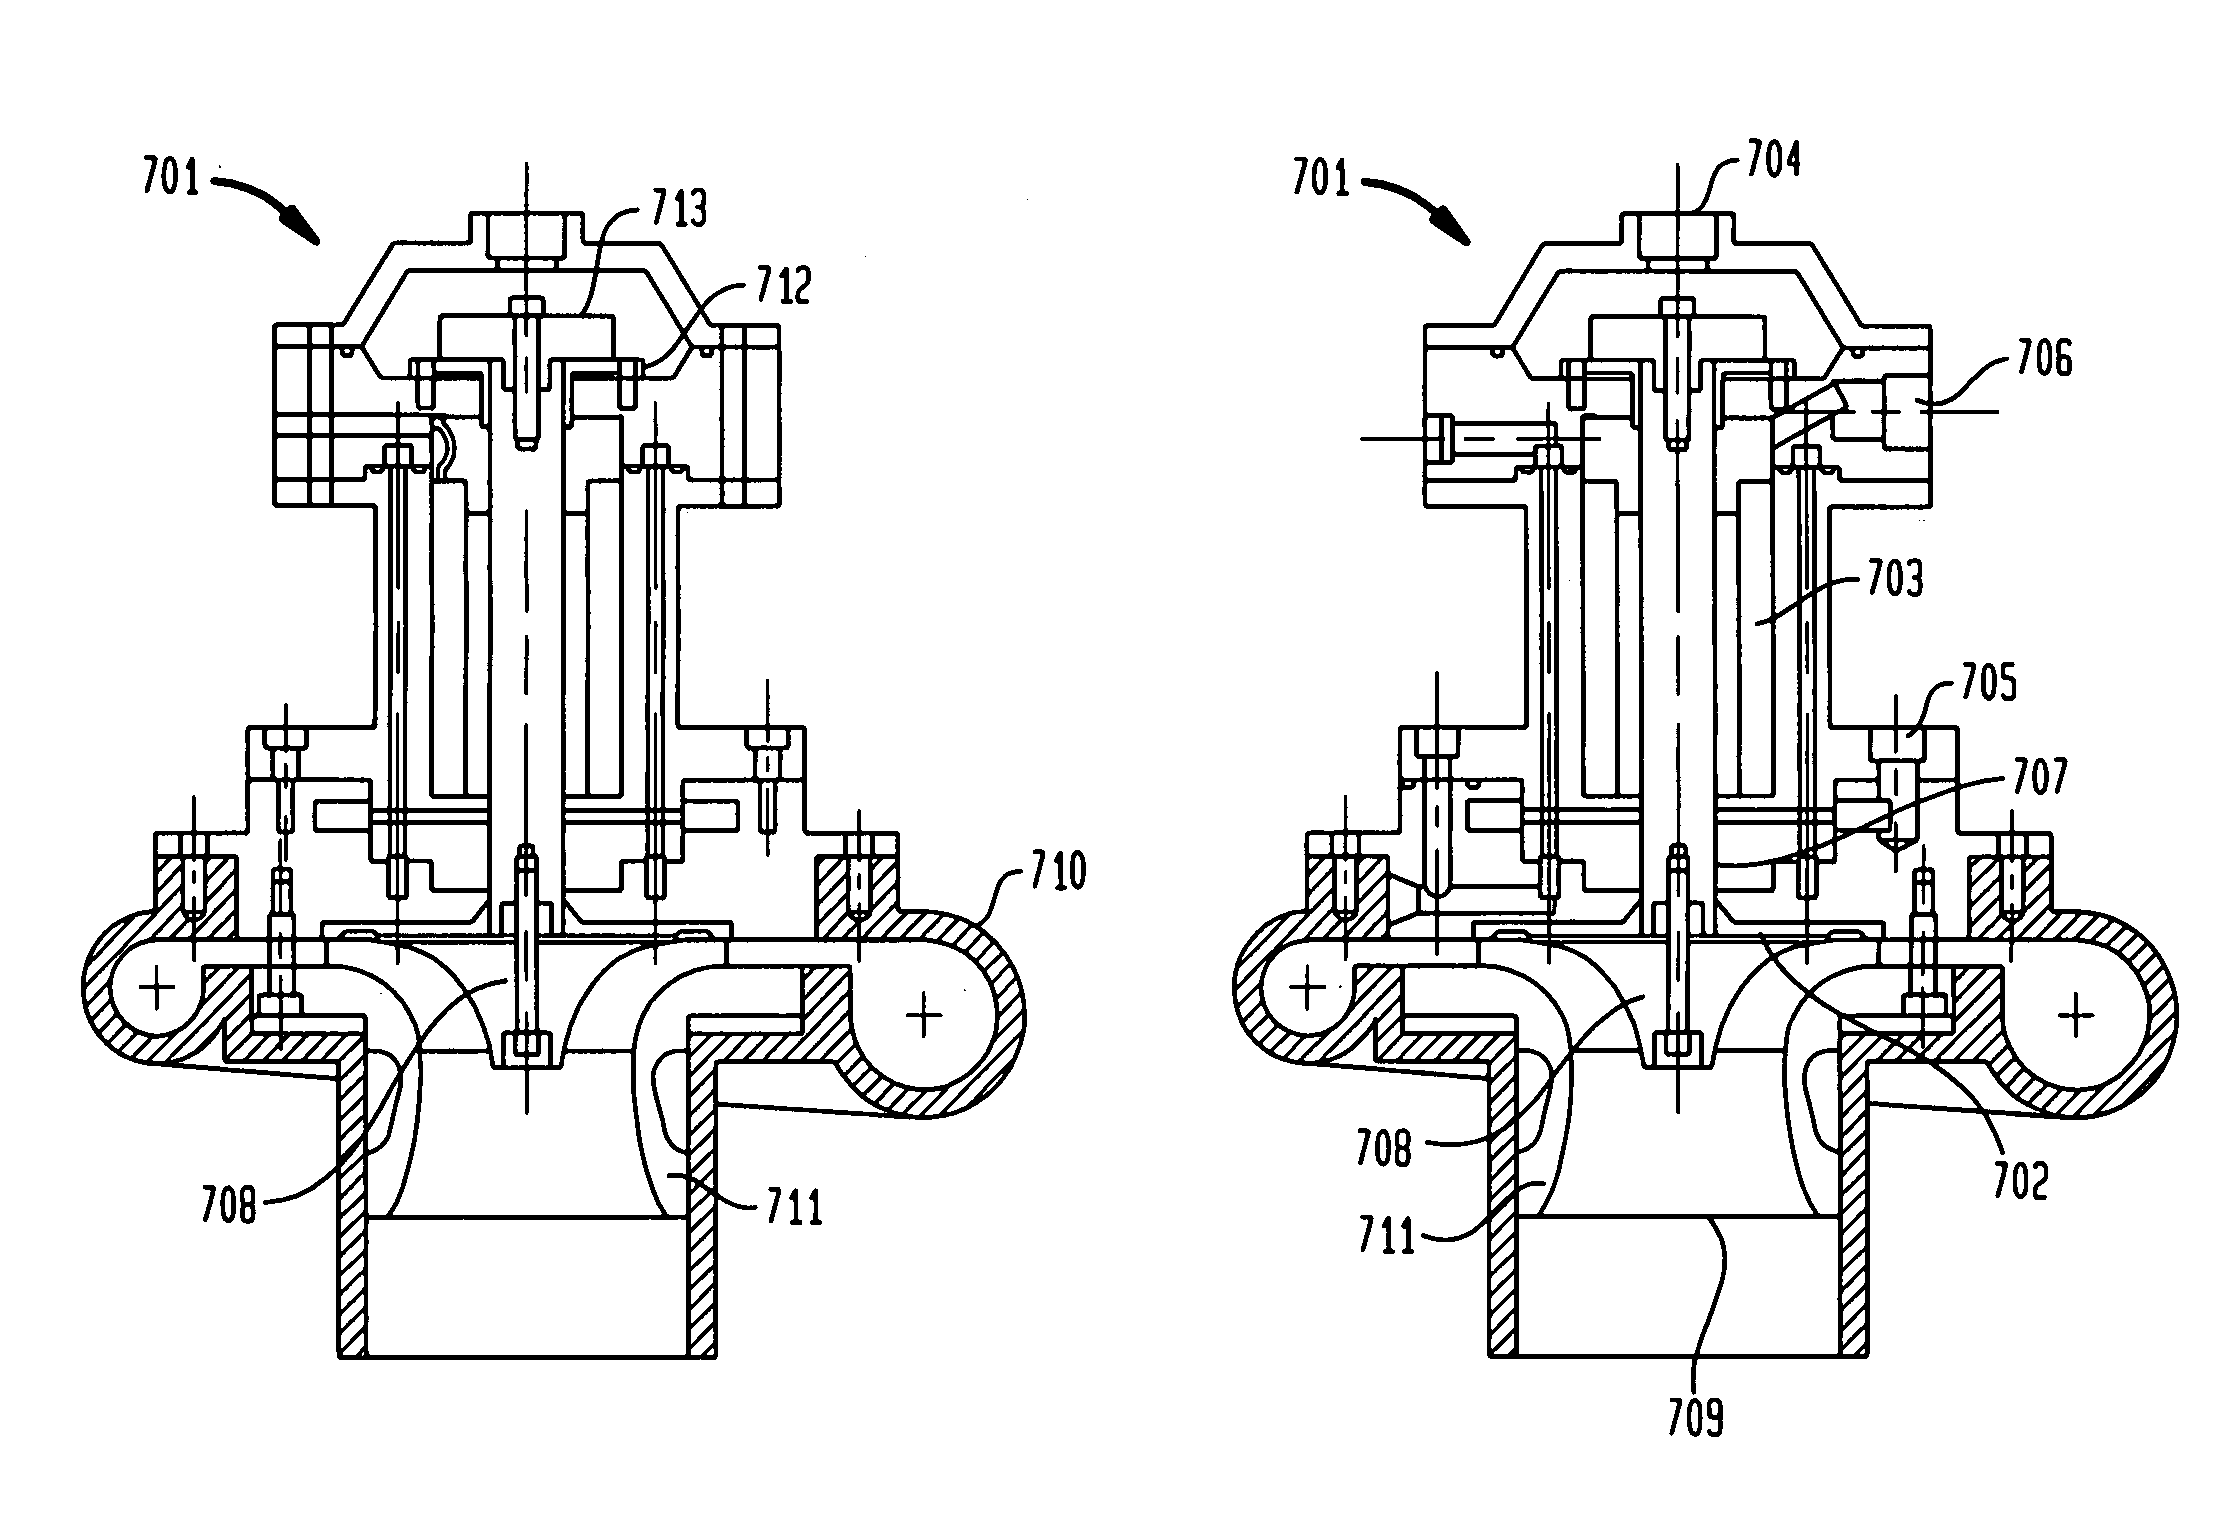 Centrifugal turbine blower with gas foil bearings